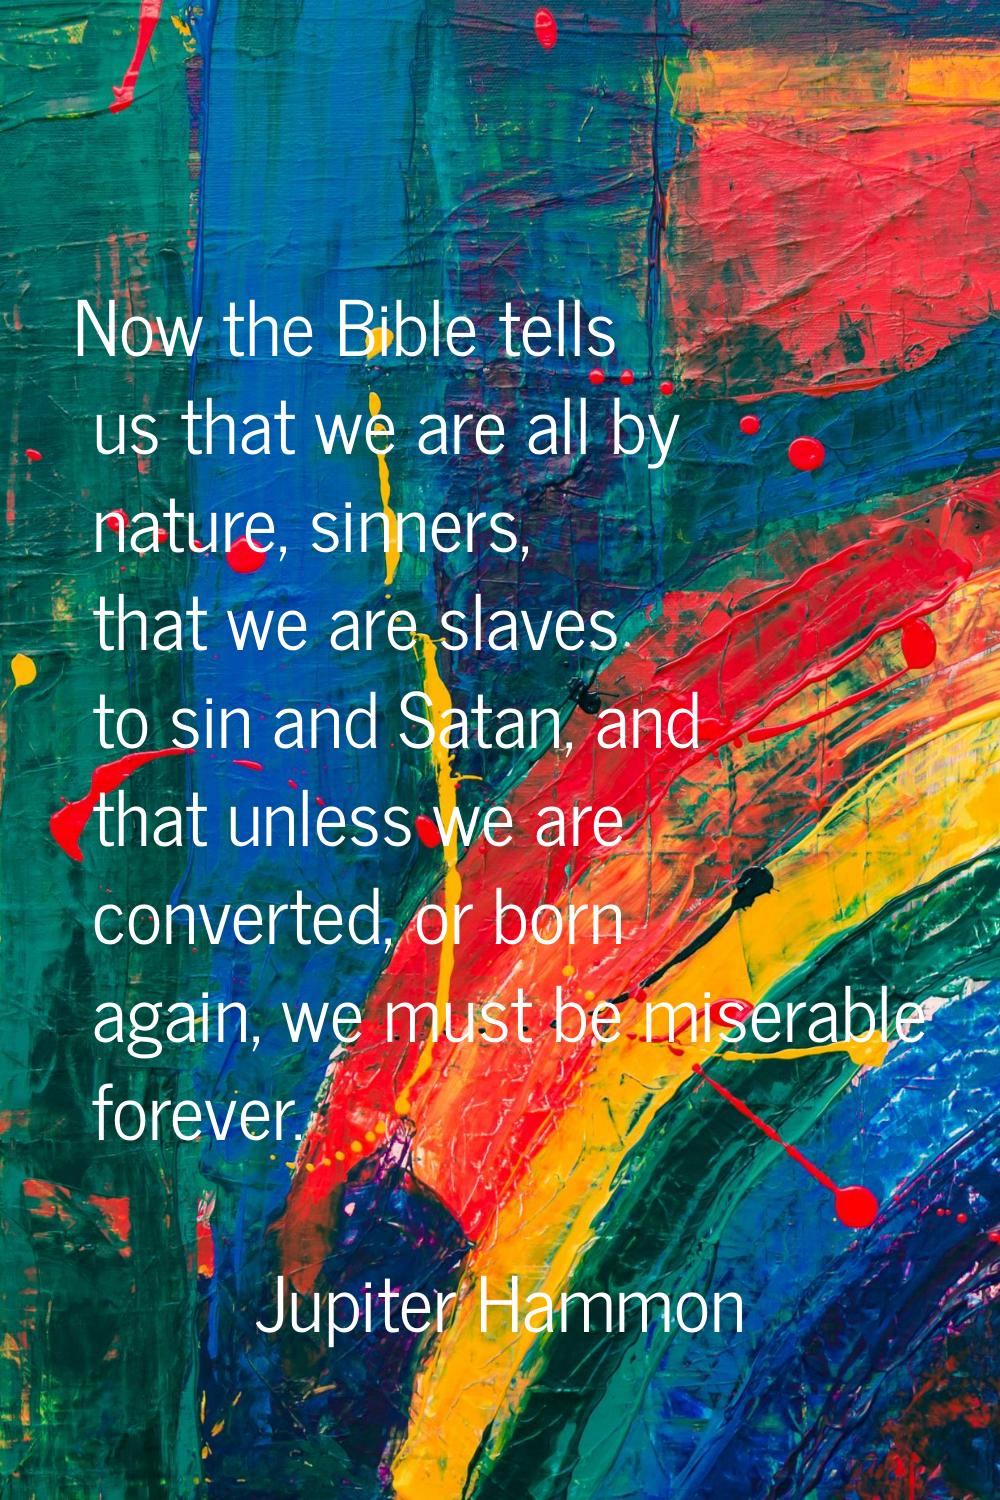 Now the Bible tells us that we are all by nature, sinners, that we are slaves to sin and Satan, and